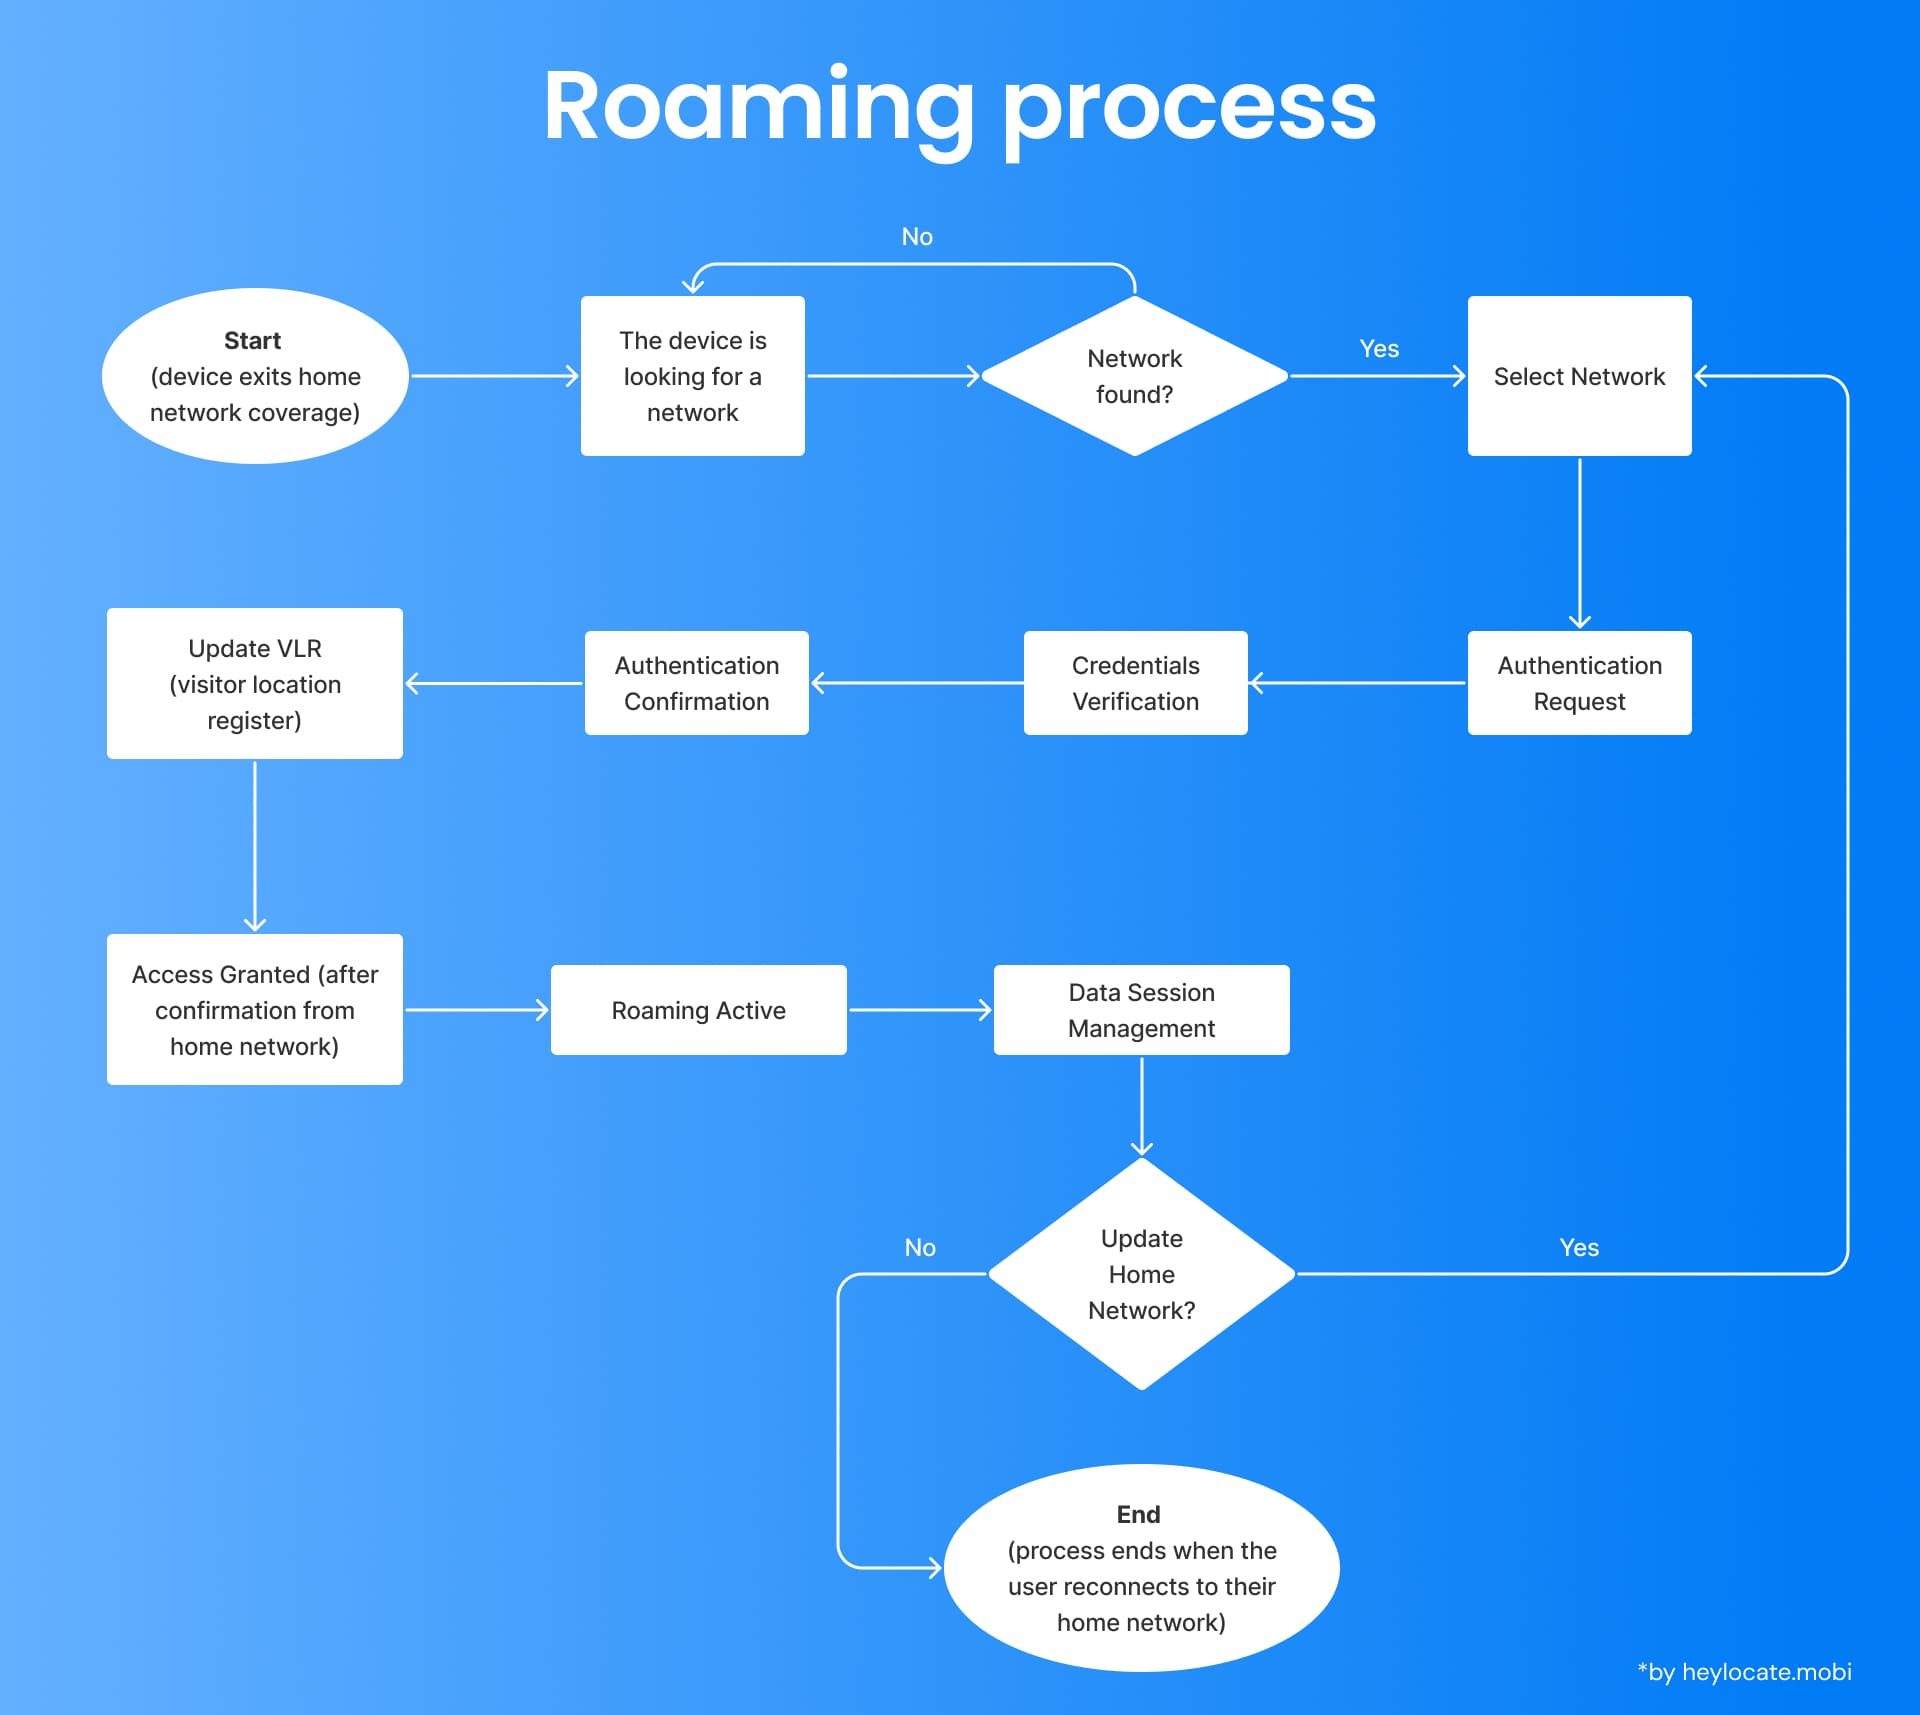 Flowchart detailing the steps a mobile device goes through when roaming, from searching for a network to data session management